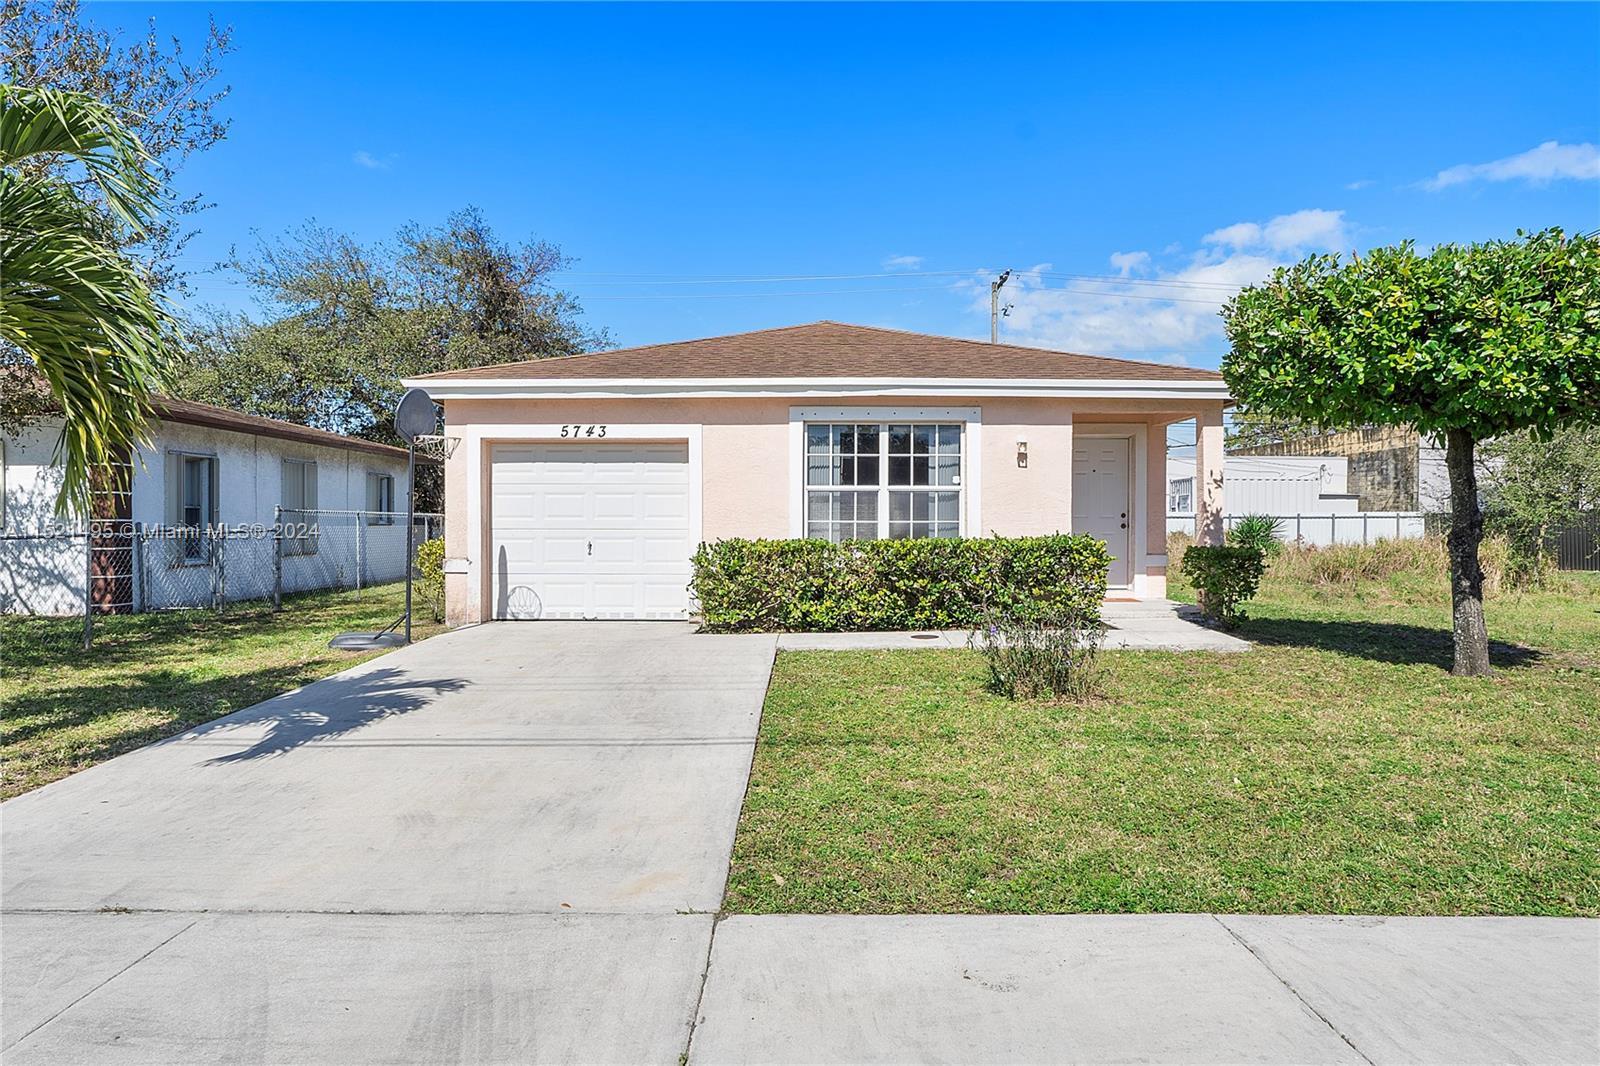 Photo of 5743 Wiley St in Hollywood, FL